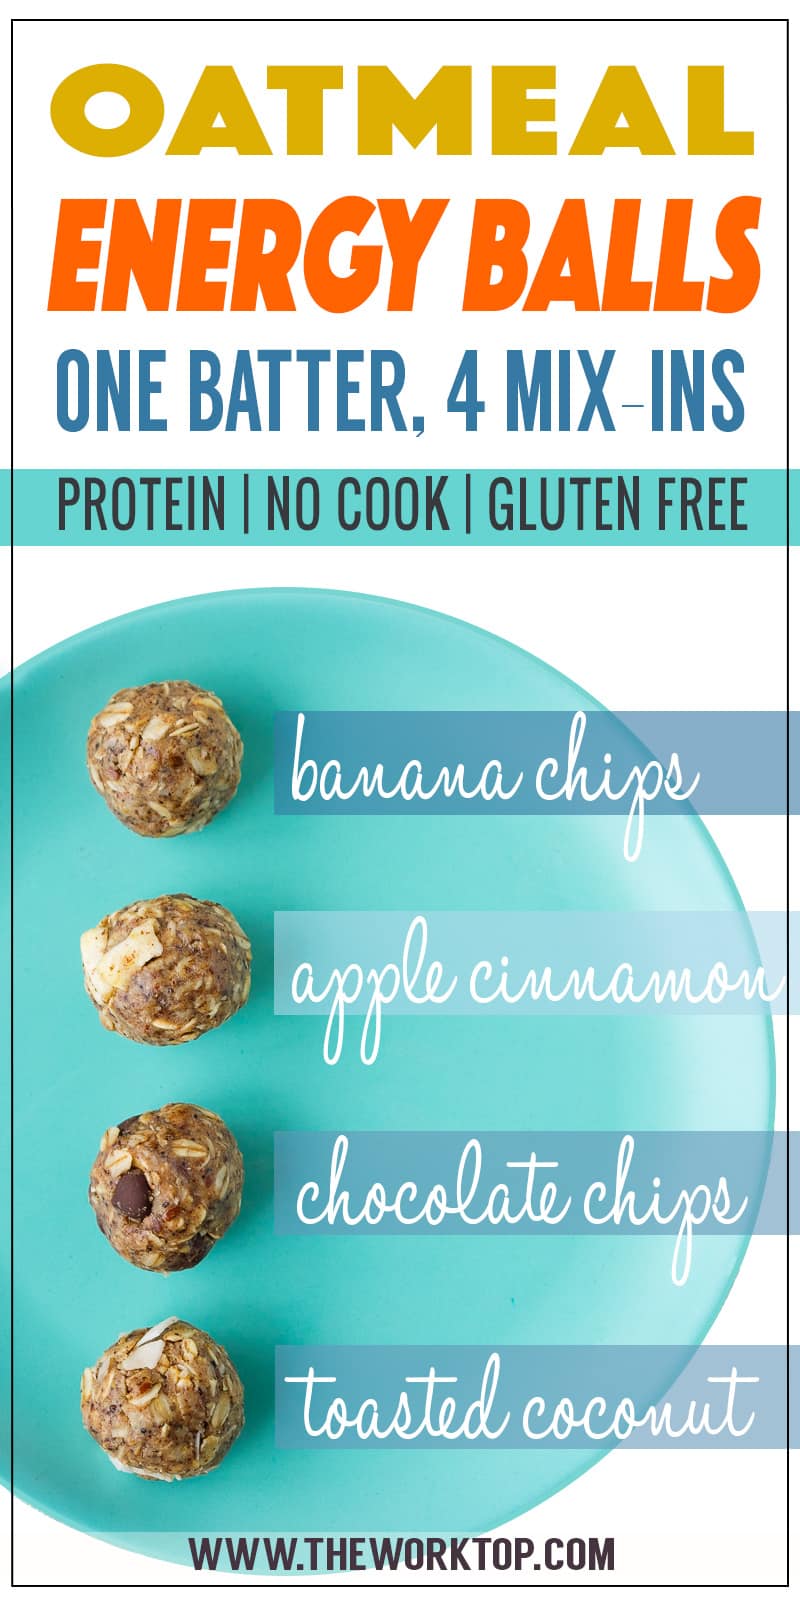 Healthy No Cook Oatmeal Energy Balls - one batter, four different mix-ins. A grab and go breakfast for the entire family, or a delicious high protein snack! Recipe from www.theworktop.com. #grabandgo #healthybreakfast #energyballs